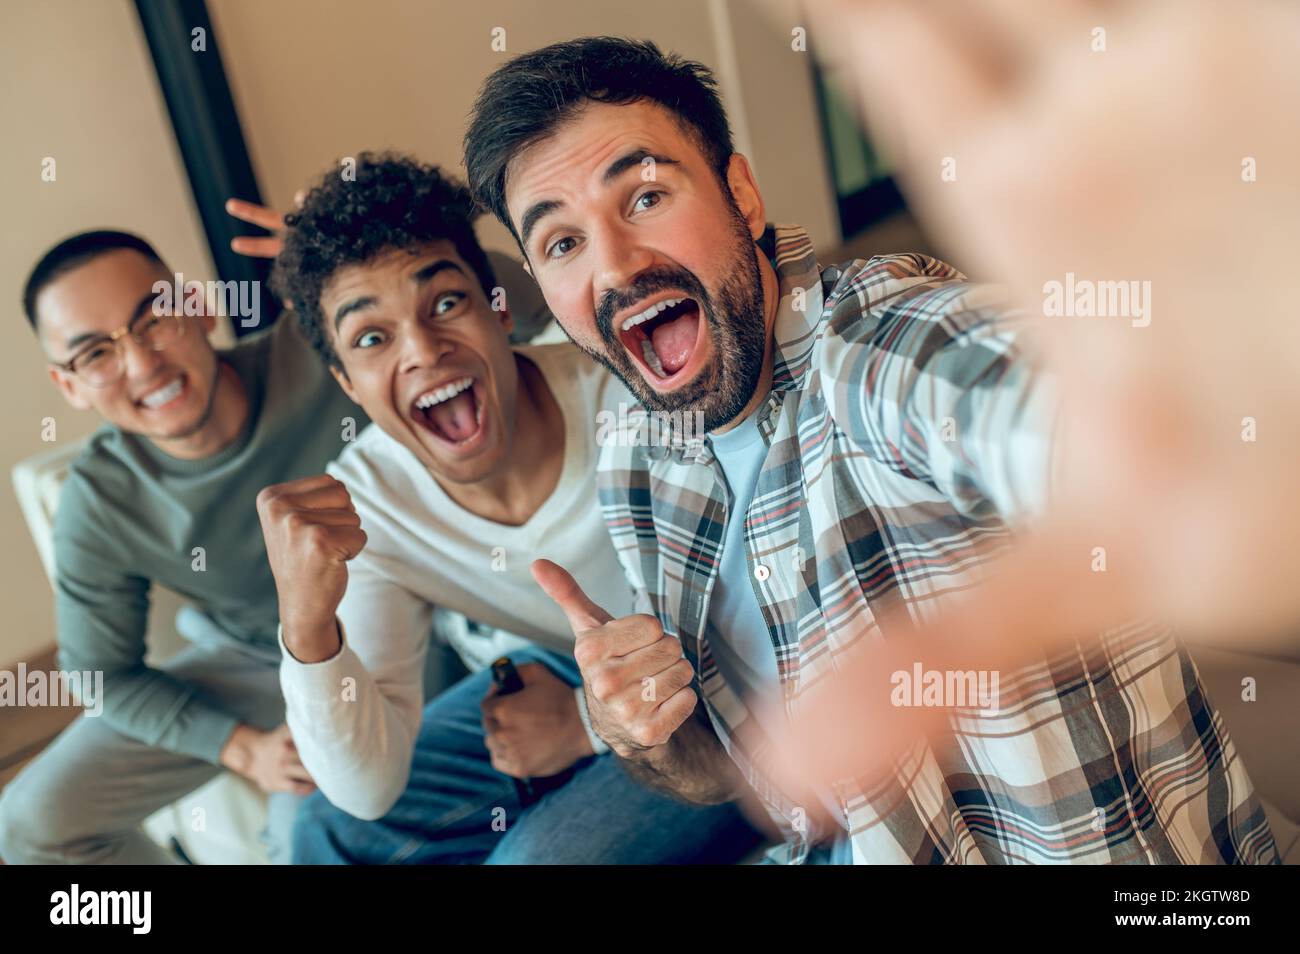 Merry friends photographing themselves with the smartphone Stock Photo